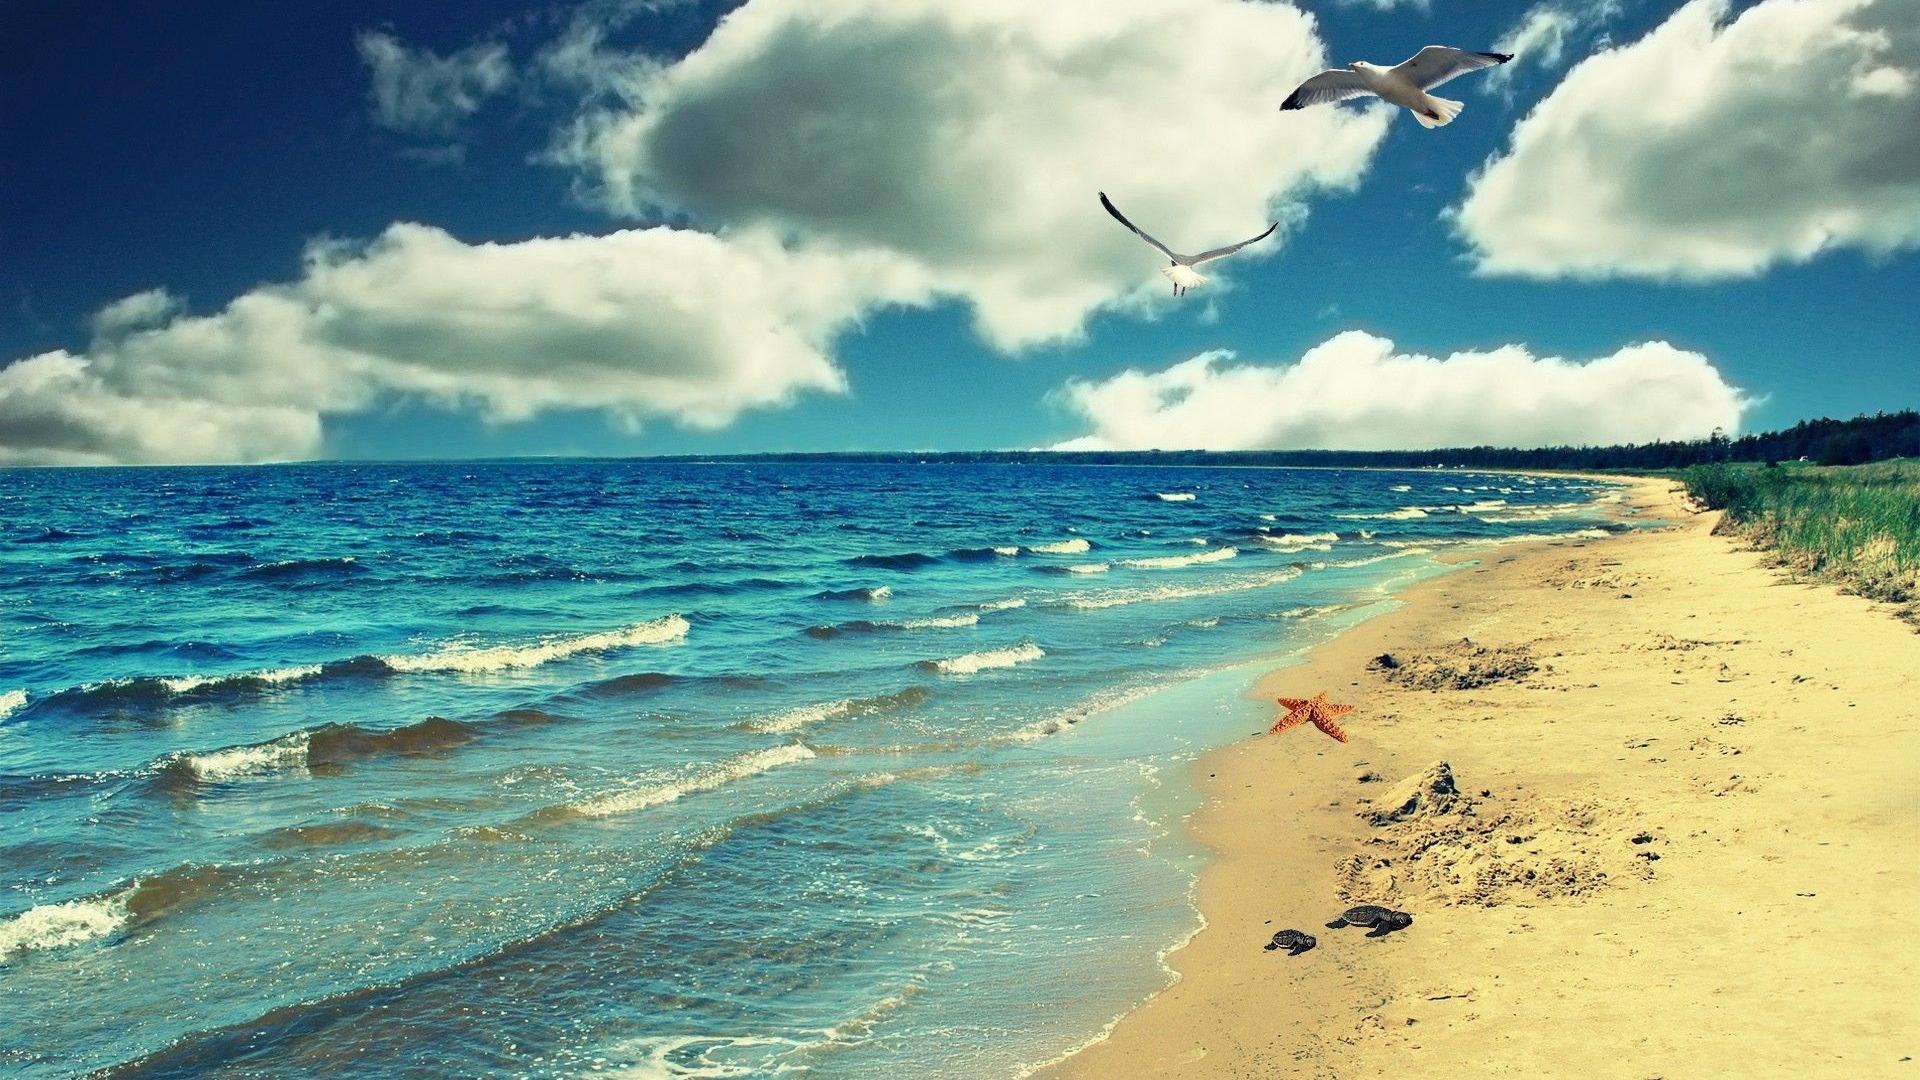 Hd Beach Wallpapers 1080p With 19201080 Pixel Wide Screen